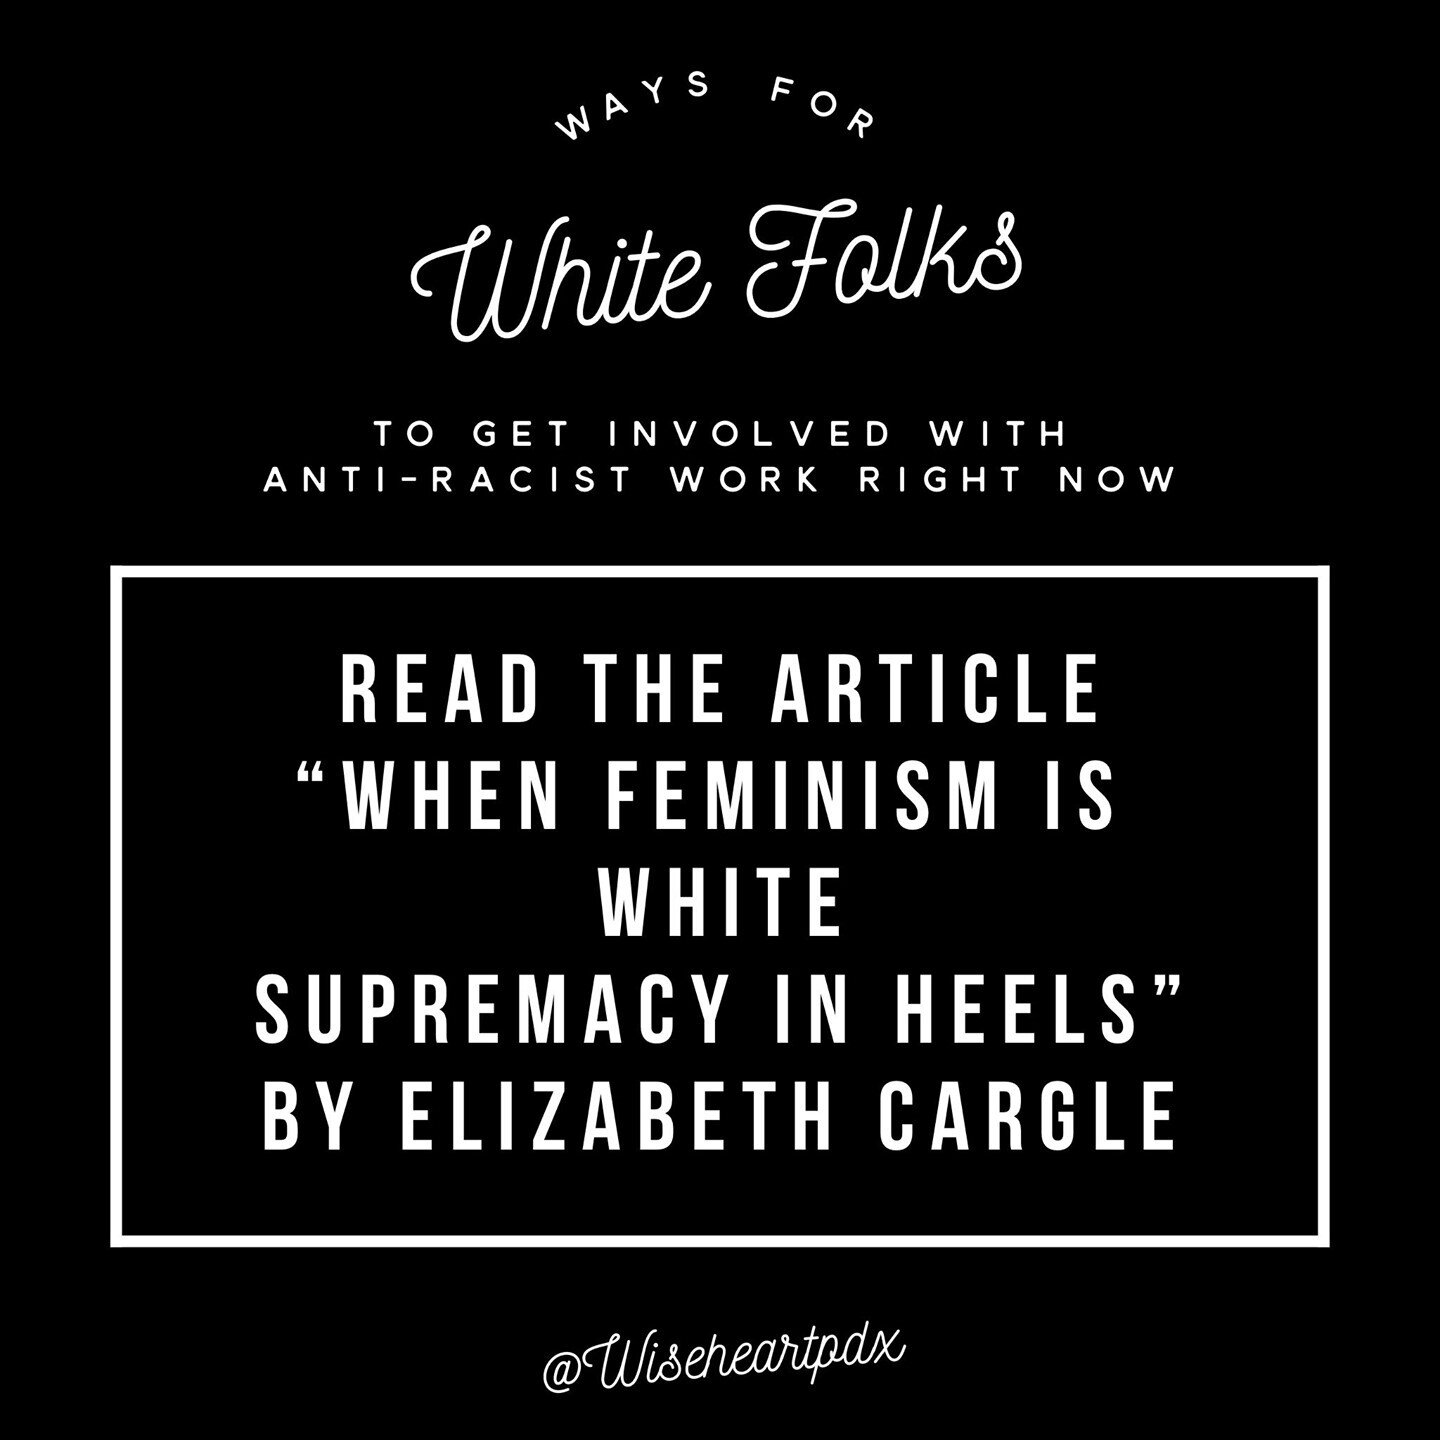 The link to this resource is in this document (https://bit.ly/2BrqpDd). We urge our white readers to join us in doing anti-racist work to help actively work against the systemic and oppressive waters in which we all reside. If you are a white person 